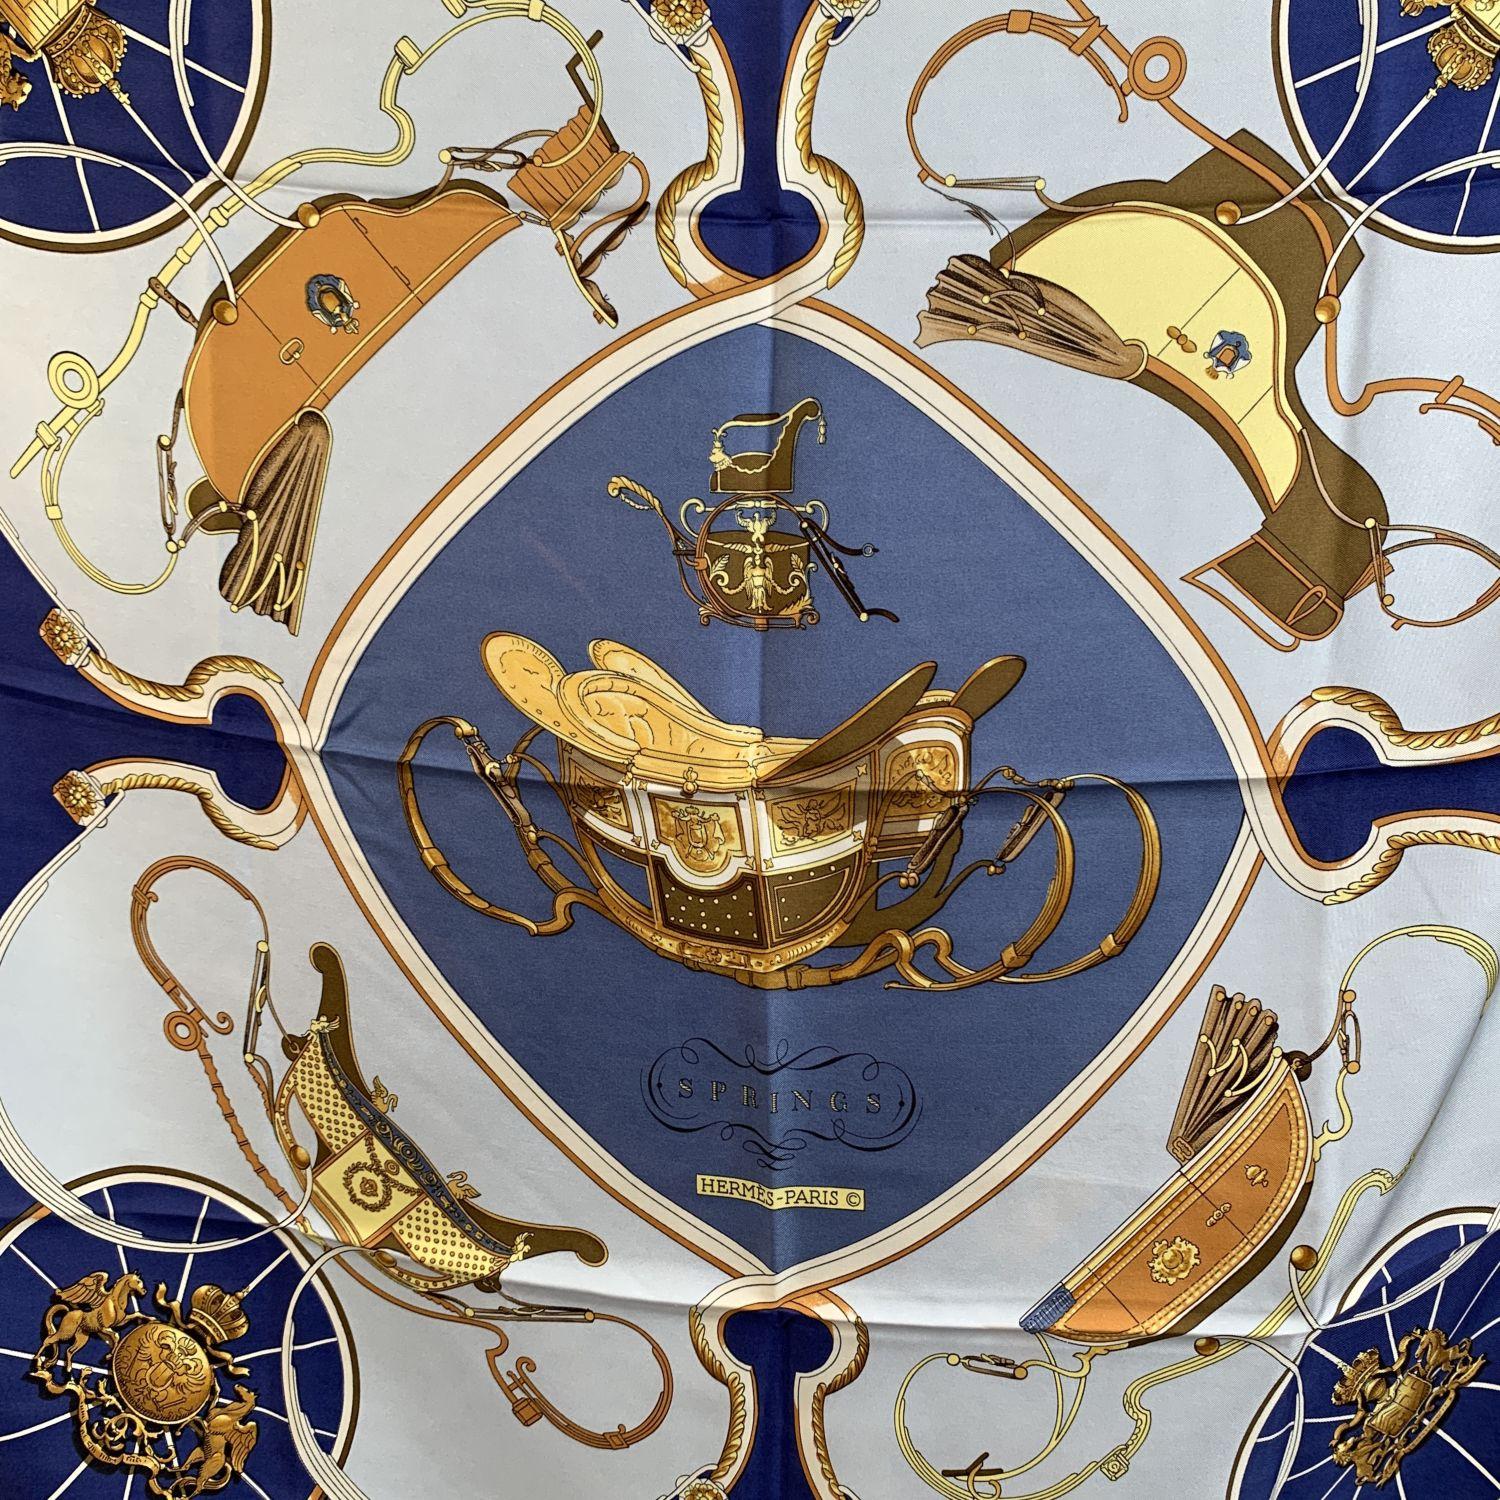 Hermes Paris Vintage Silk Scarf 'Springs' . It depicts in its center the phaeton carriage belonging to Napoleon I's son. Artist :Philippe Ledoux. First Issue : 1974. Blue, Gray, Yellow colors. Hand rolled hem. Fabric / Material: 100% Silk. Approx